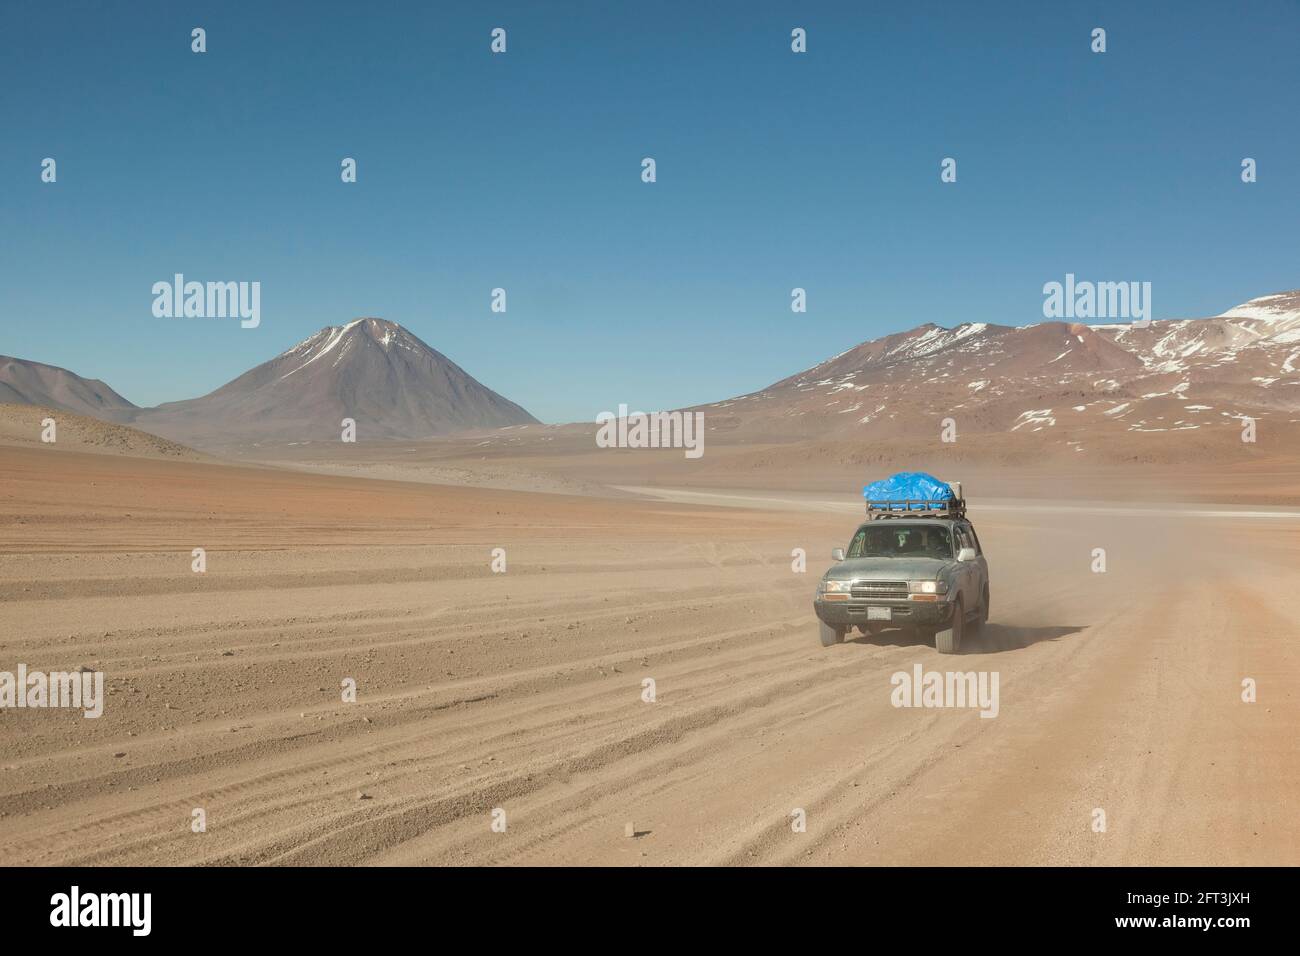 Against a backdrop of volcanoes, a 4x4 off-road vehicle speeds across Bolivia's desert landscape on an overland tourist safari. Stock Photo